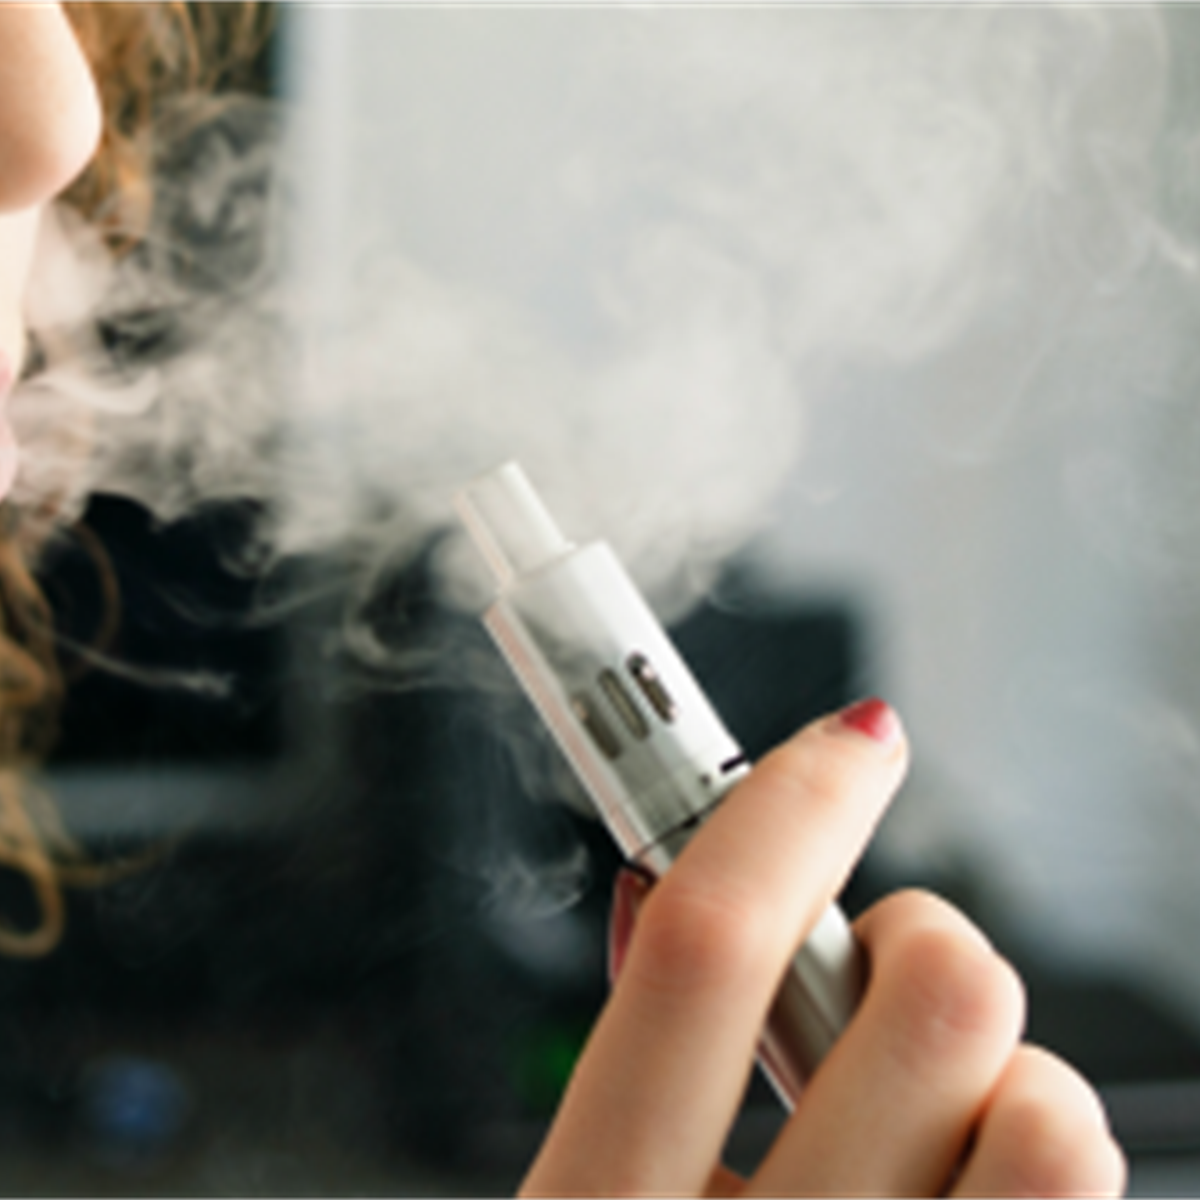 Facts For Parents About E-Cigarettes & Vaping